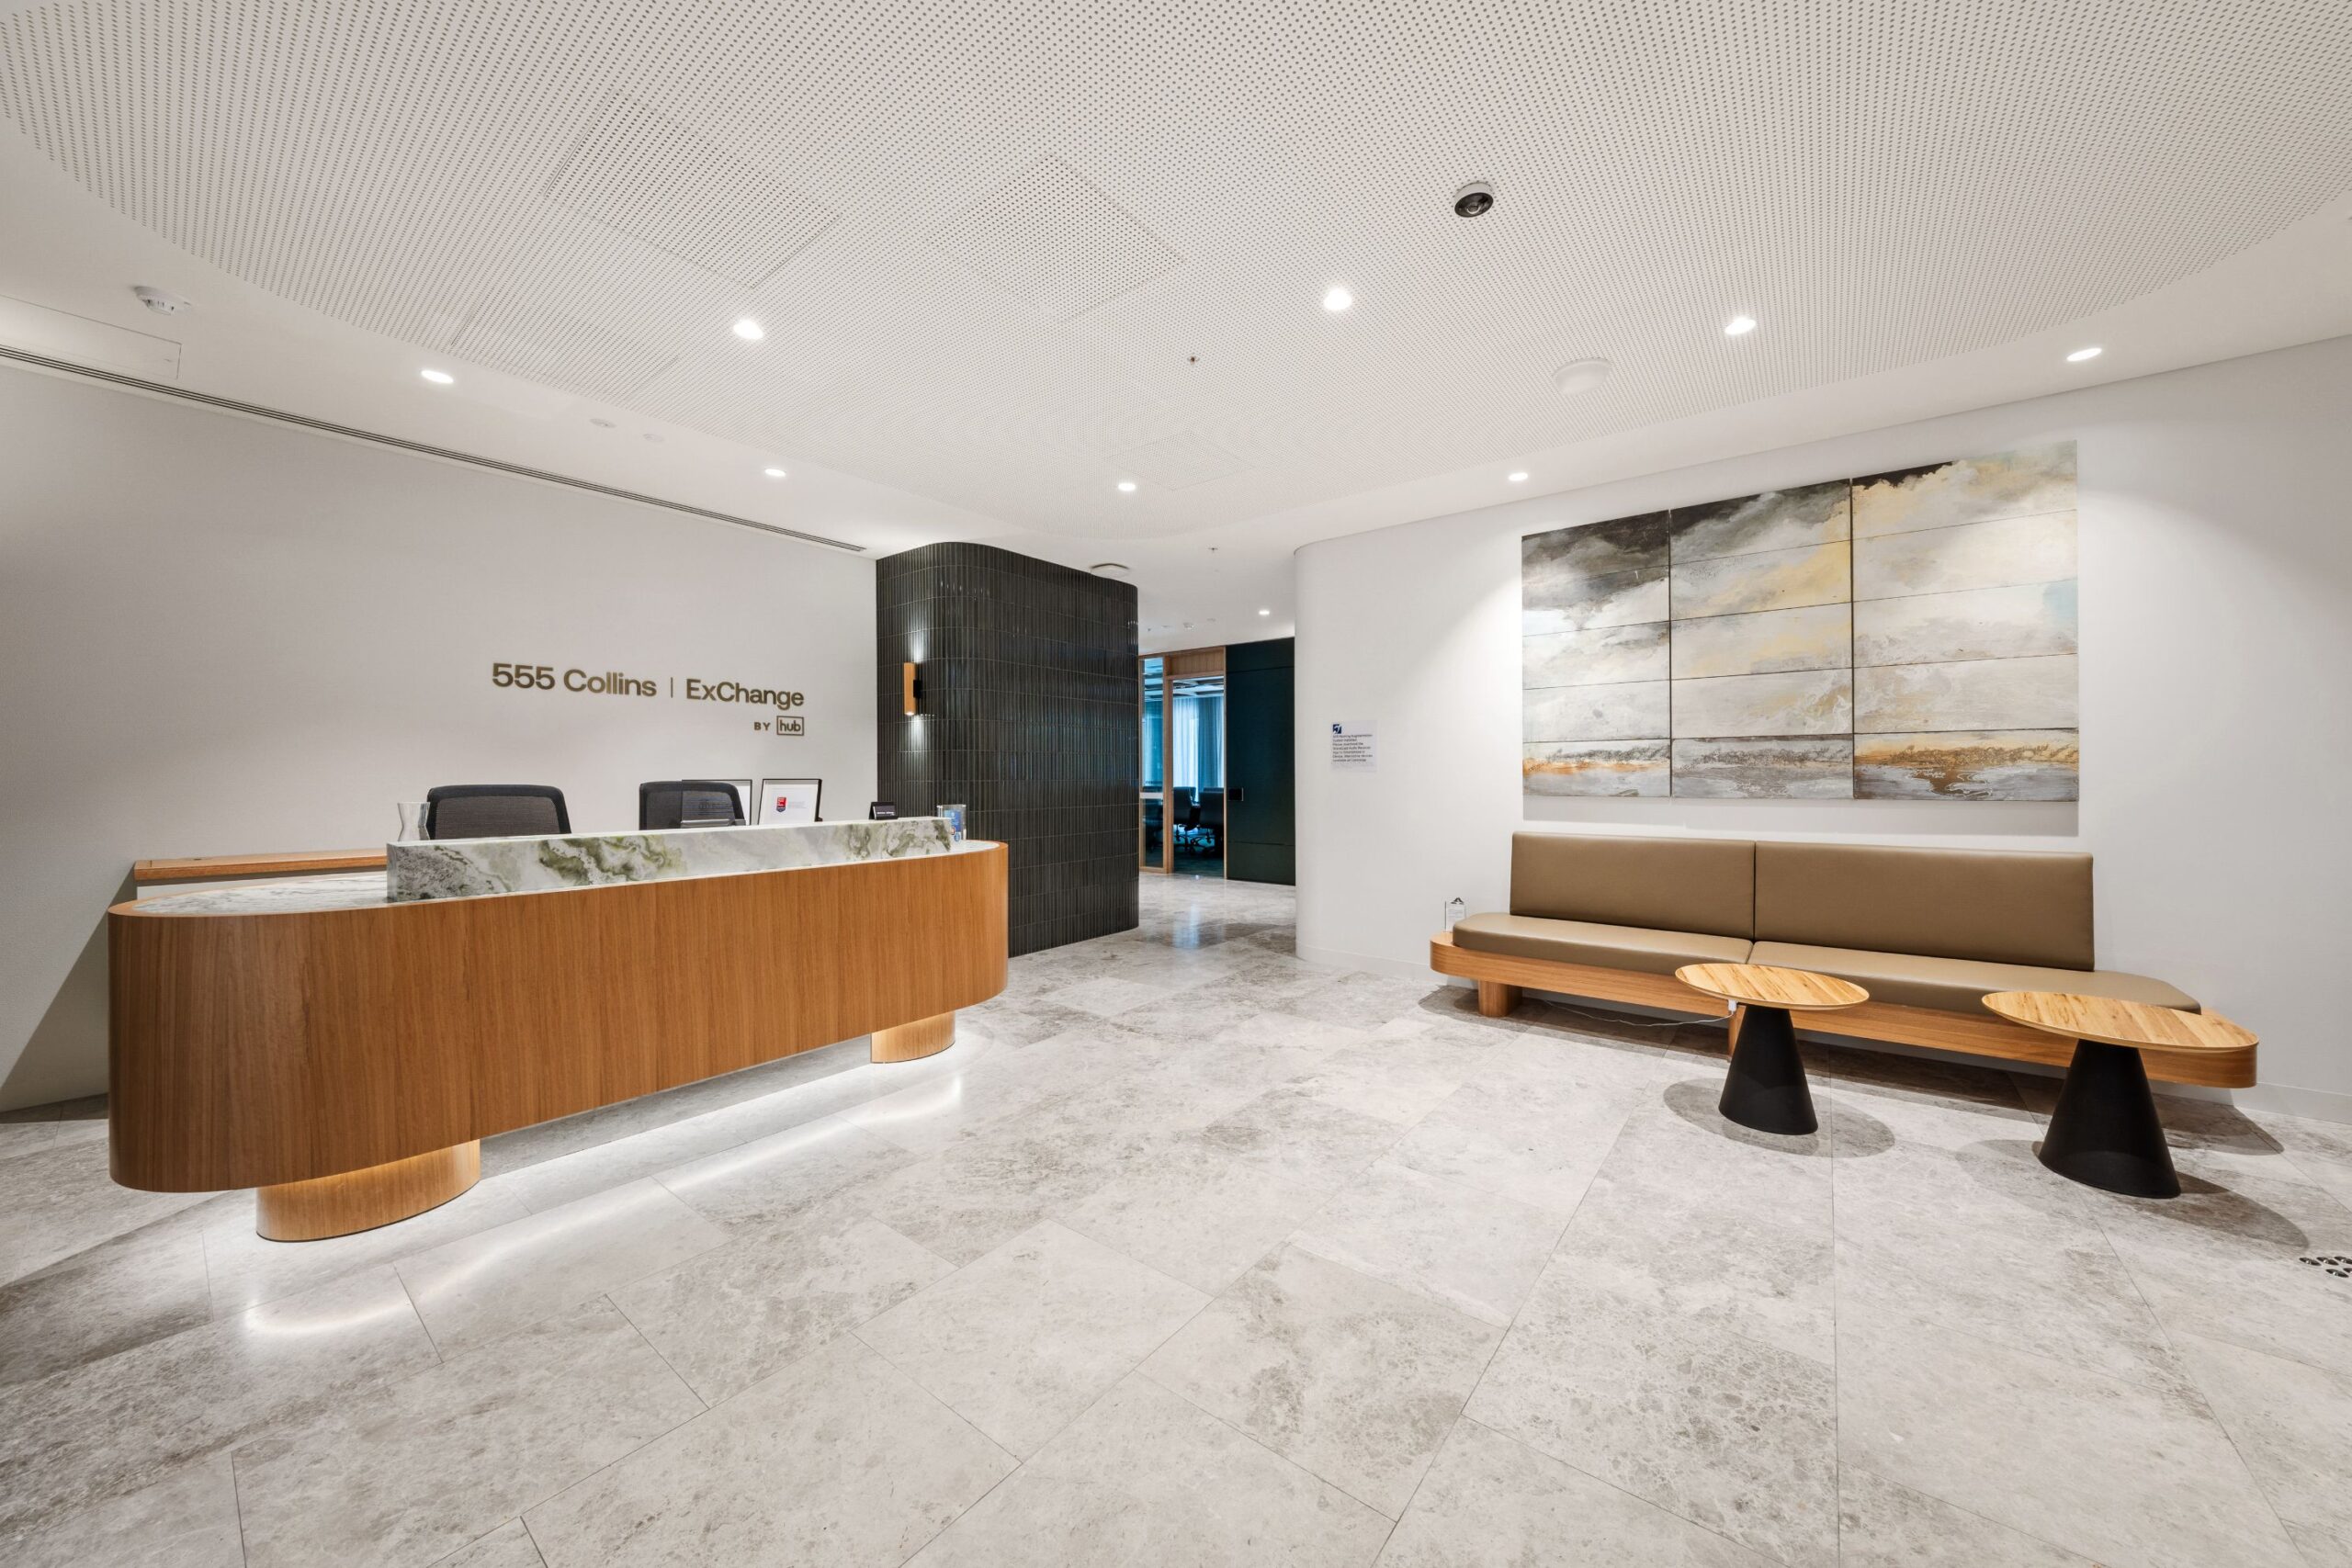 charter-hall-555-collins-st-fitted-spaces-vic-shape-australia_1